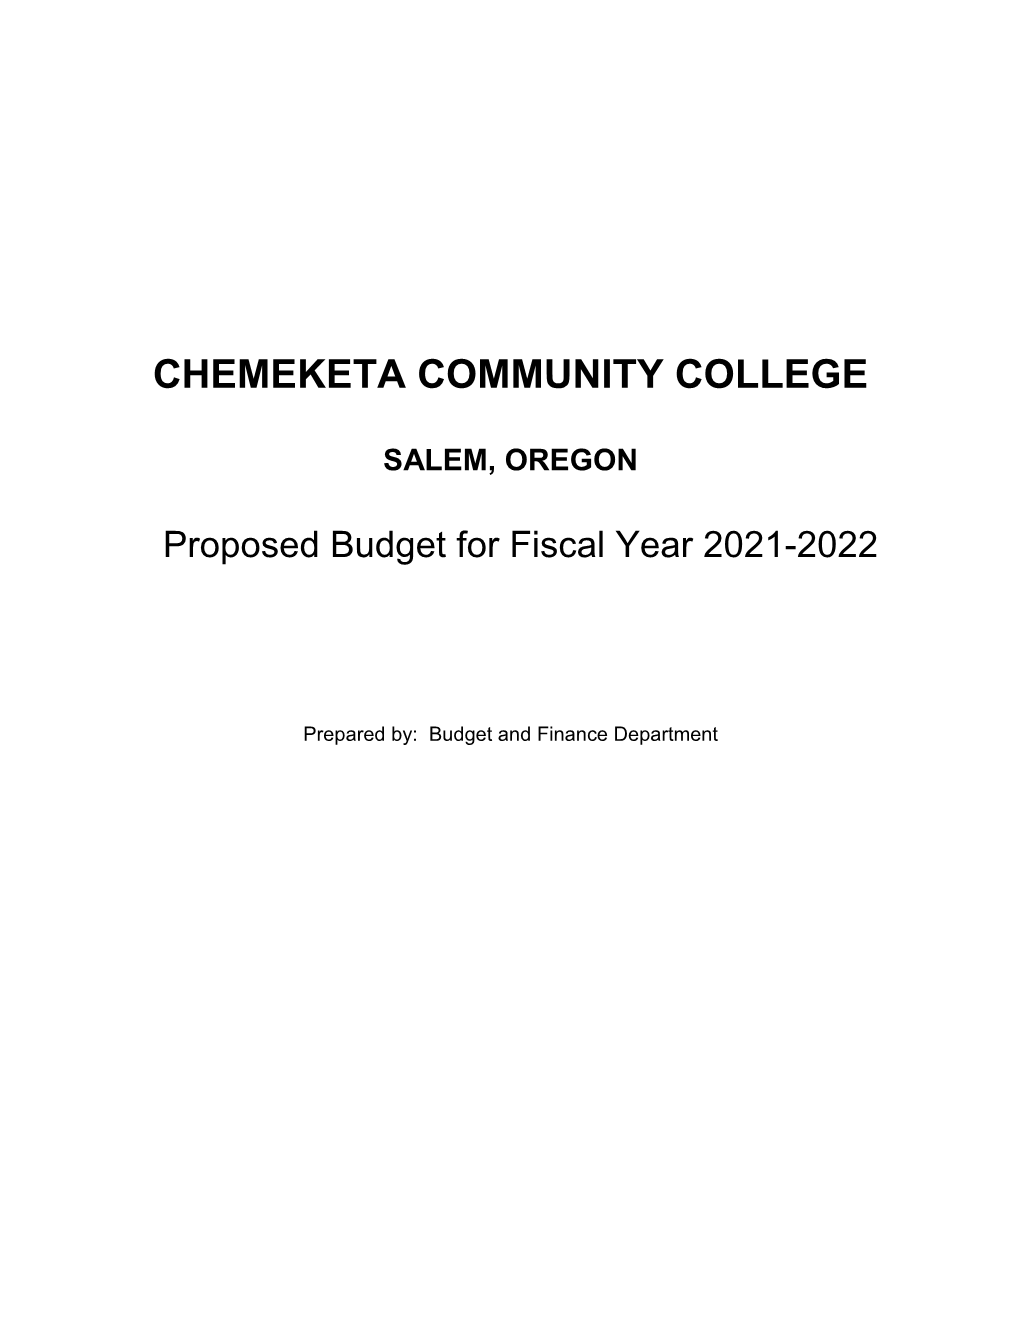 Proposed Budget for Fiscal Year 2021-2022